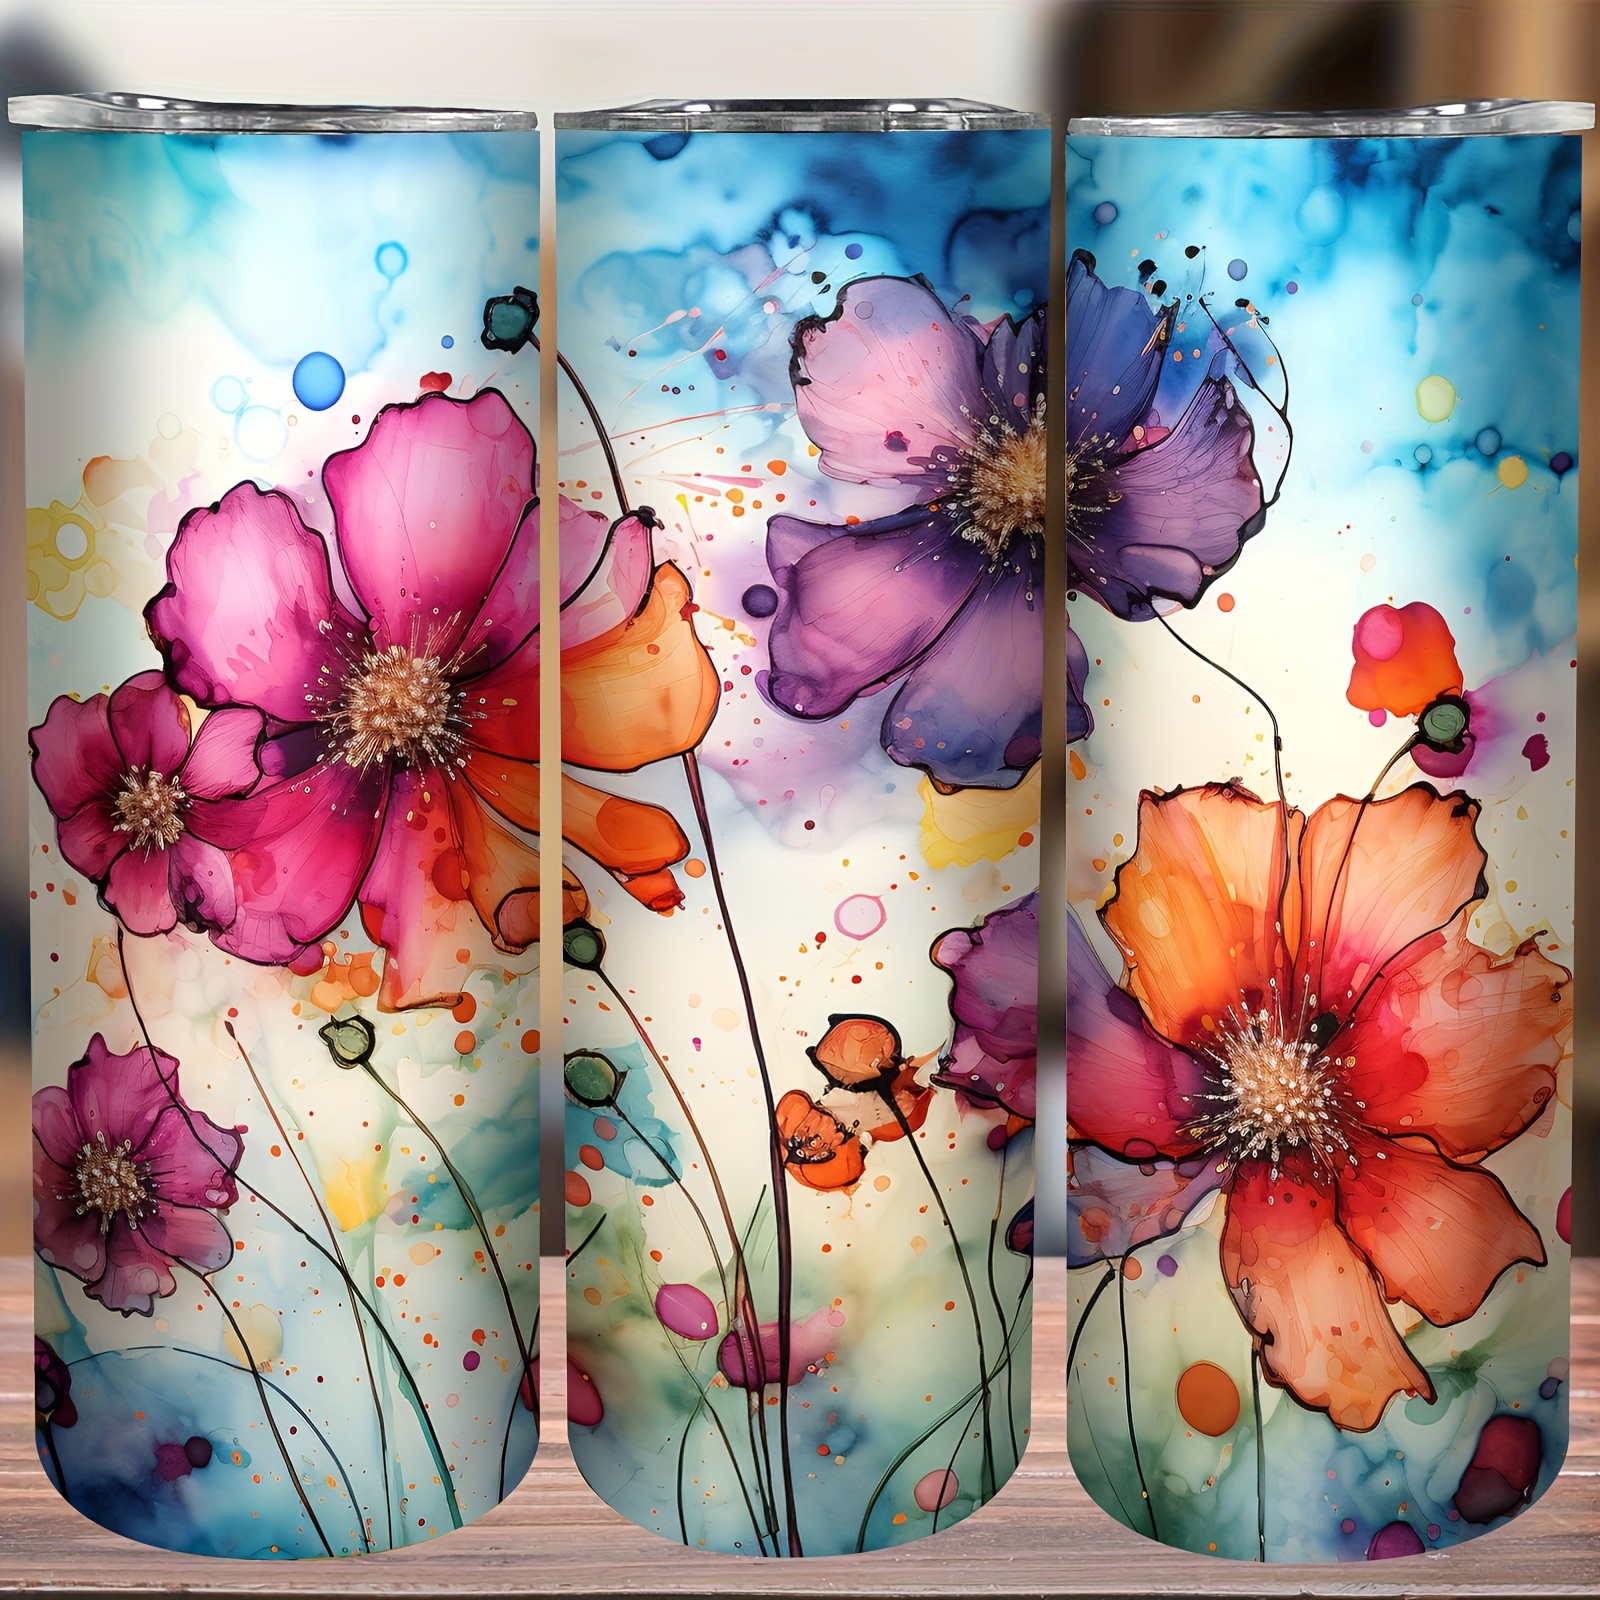 

20oz Floral Stainless Steel Tumbler With Lid And Straw, Double Wall Vacuum Insulated Travel Mug, Keeps Drinks Hot Or Cold For 6 Hours, Colorful Flower Design For On-the-go Refreshment